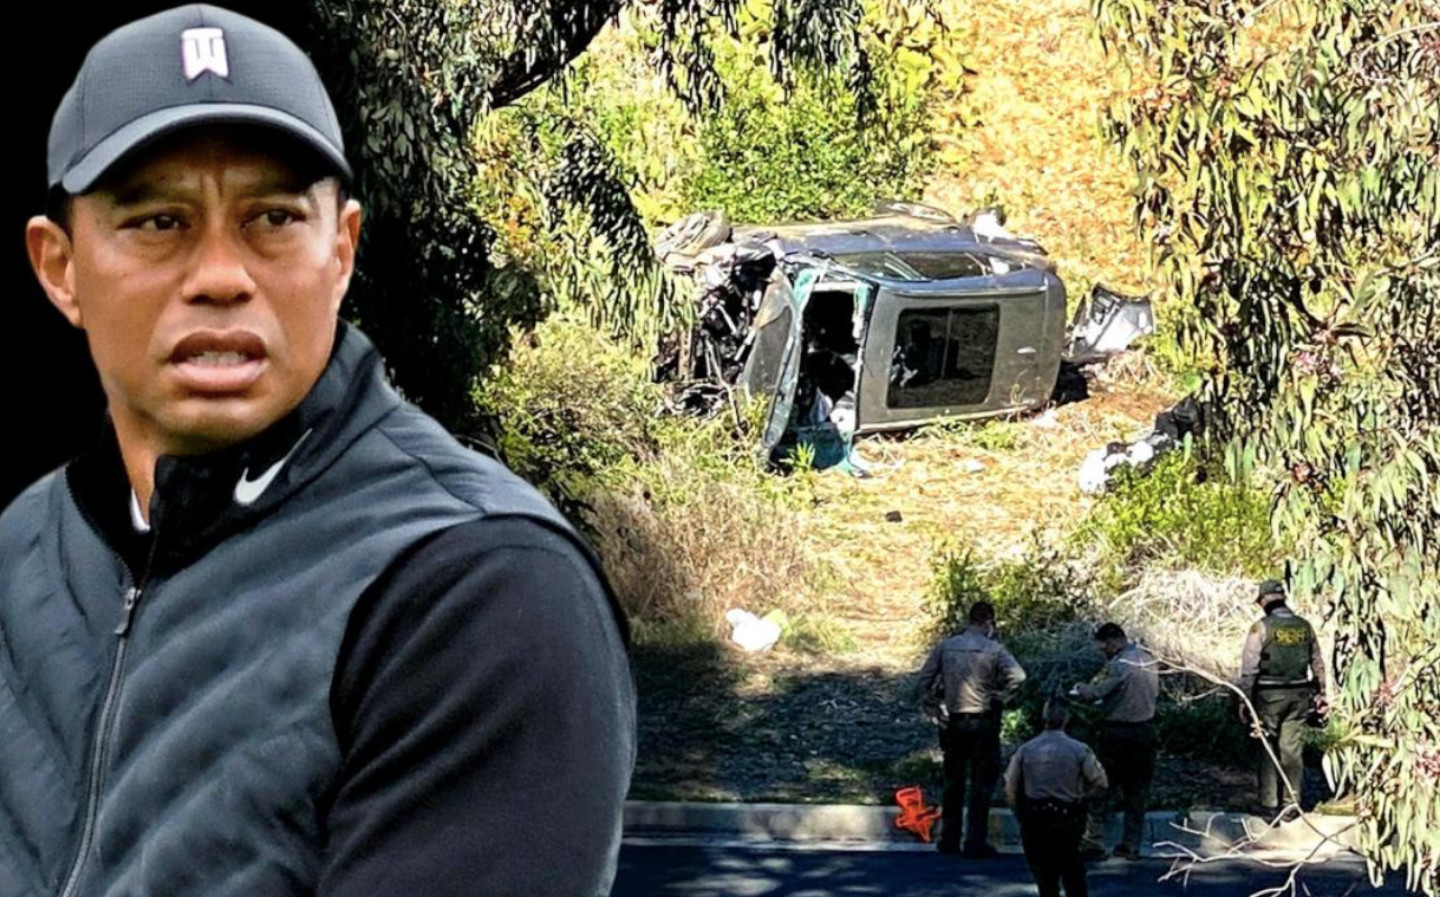 Tiger Woods "awake, responsive and recovering" after crashing Genesis SUV